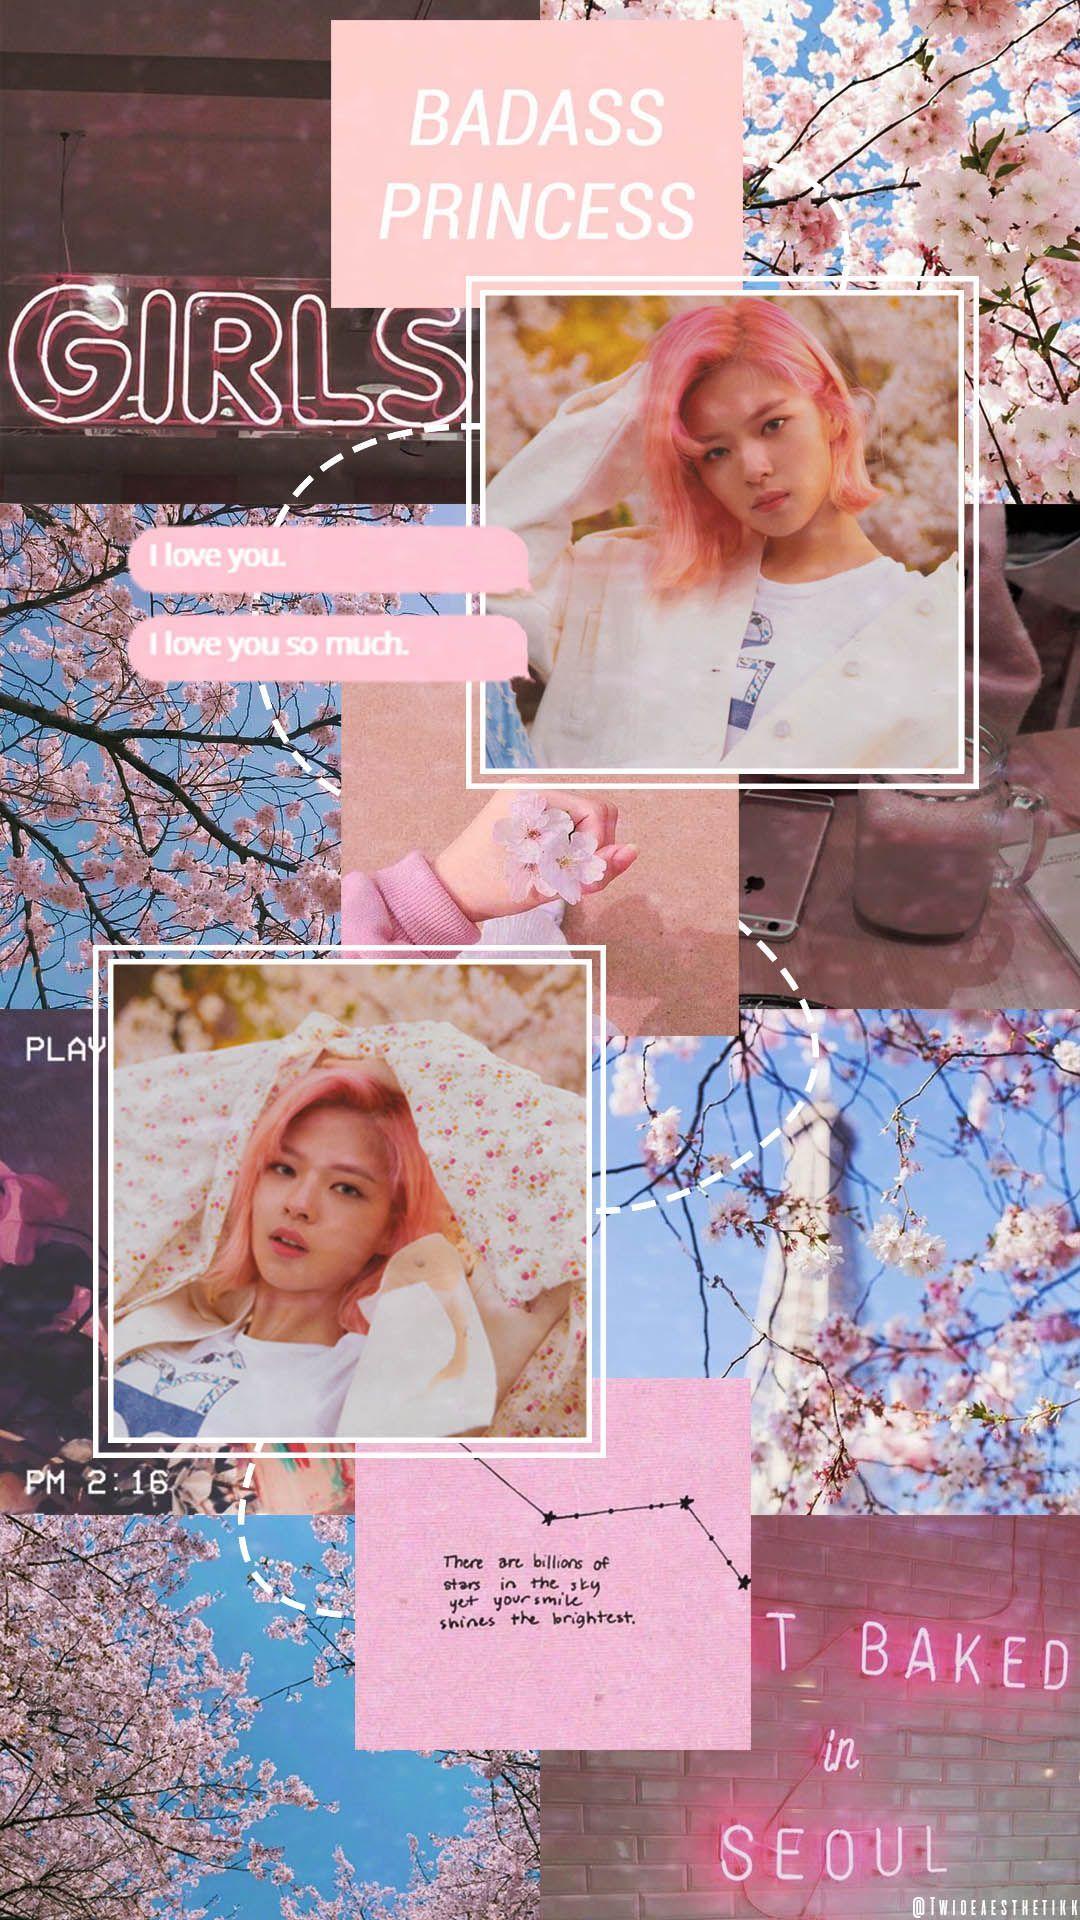 Twice Aesthetic Wallpapers - Wallpaper Cave